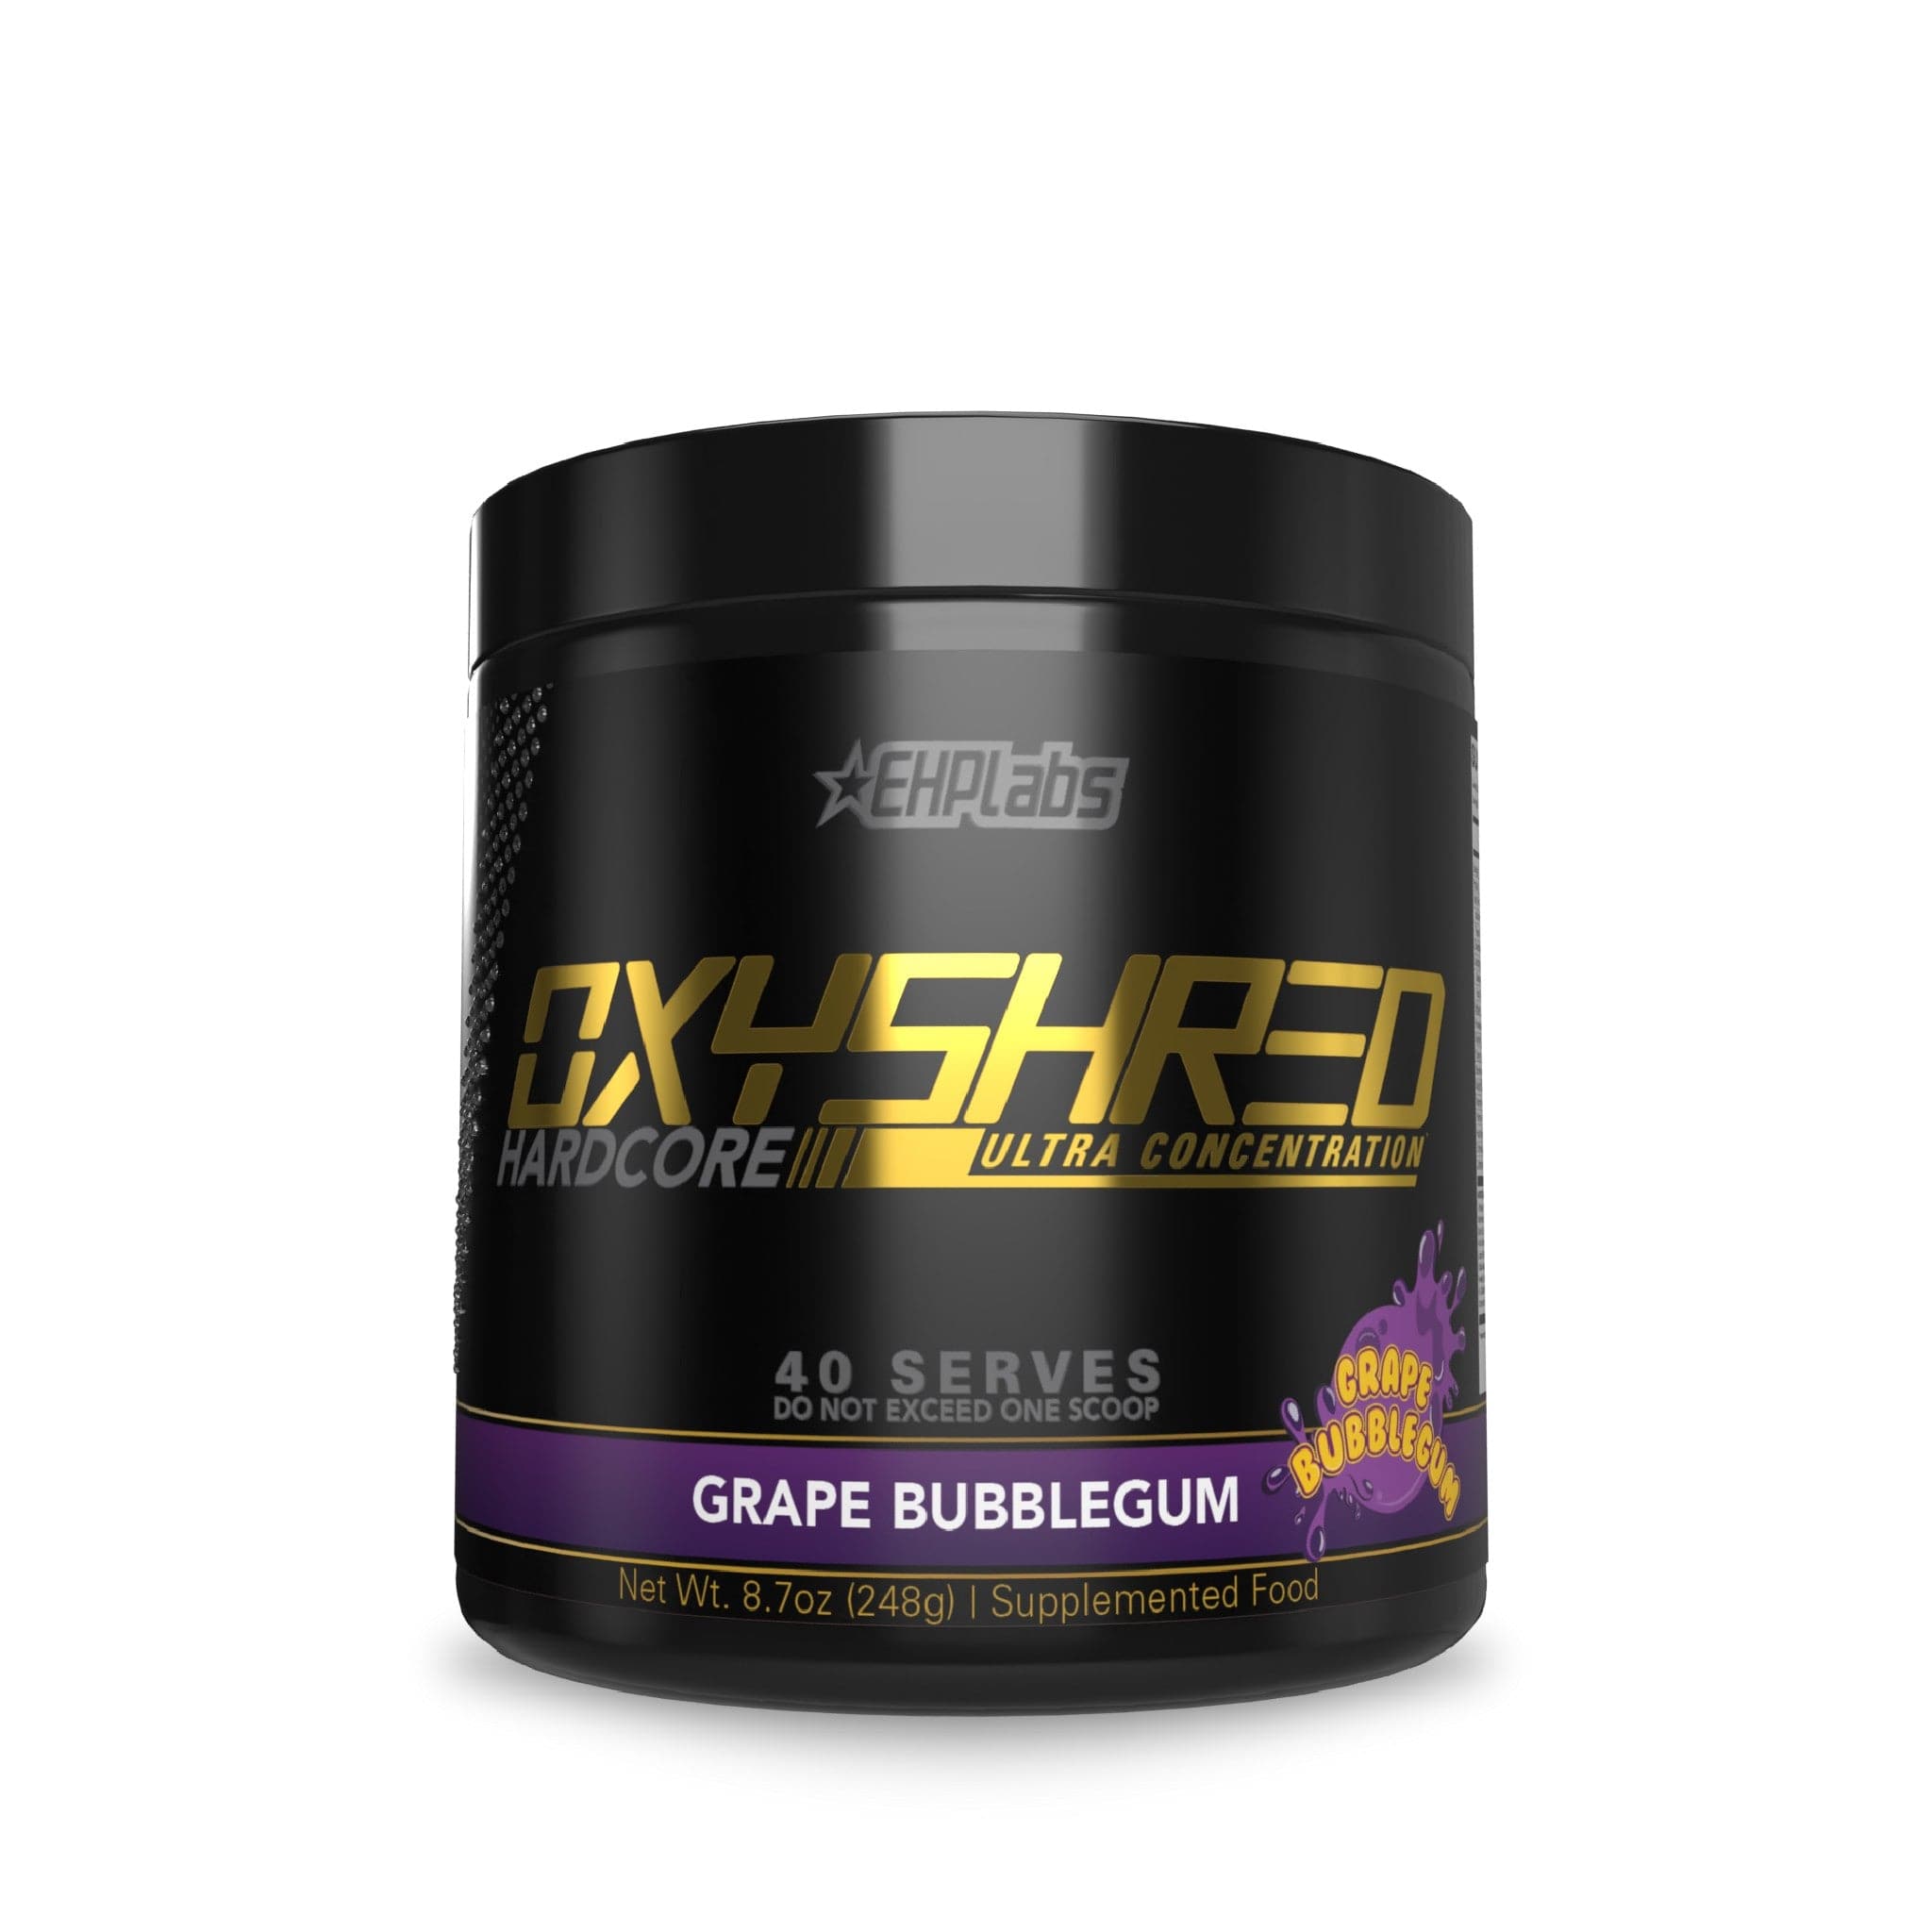 EHPLabs OxyShred Hardcore 40 servings